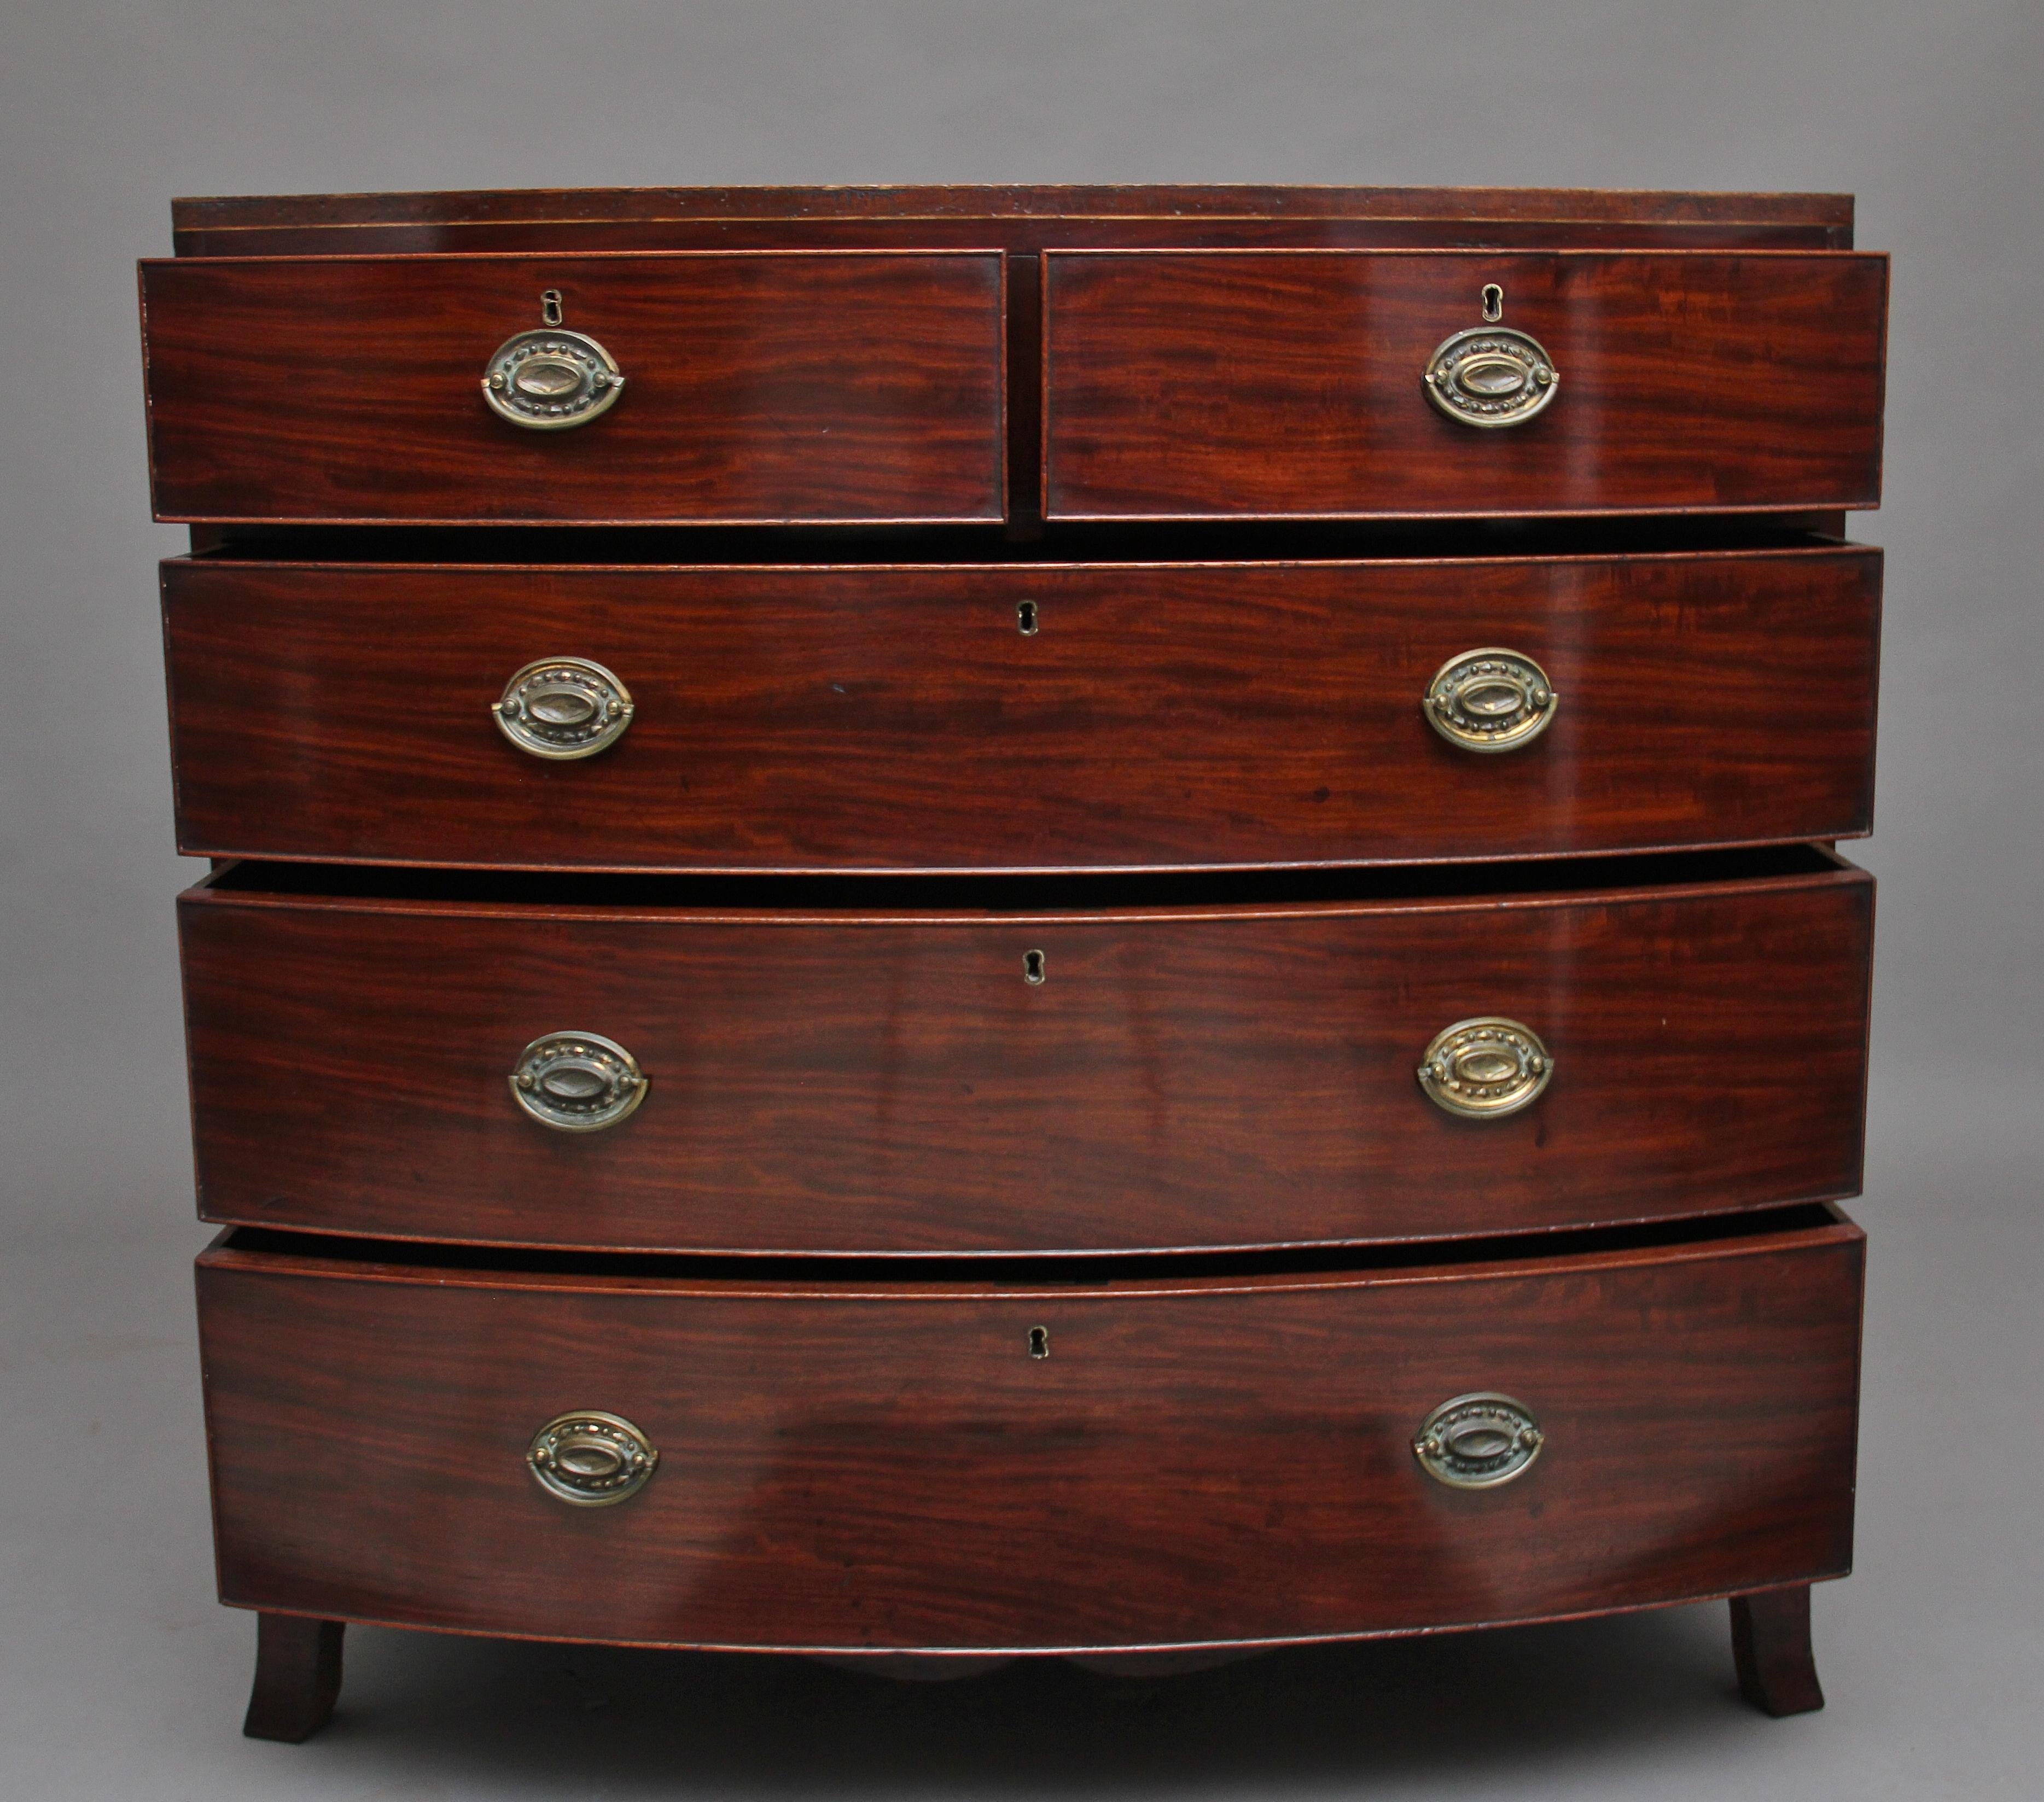 Early 19th century mahogany bowfront chest of drawers, having two short over three long graduated drawers with brass oval plate handles, having a nice shaped apron supported on splay feet, circa 1810.